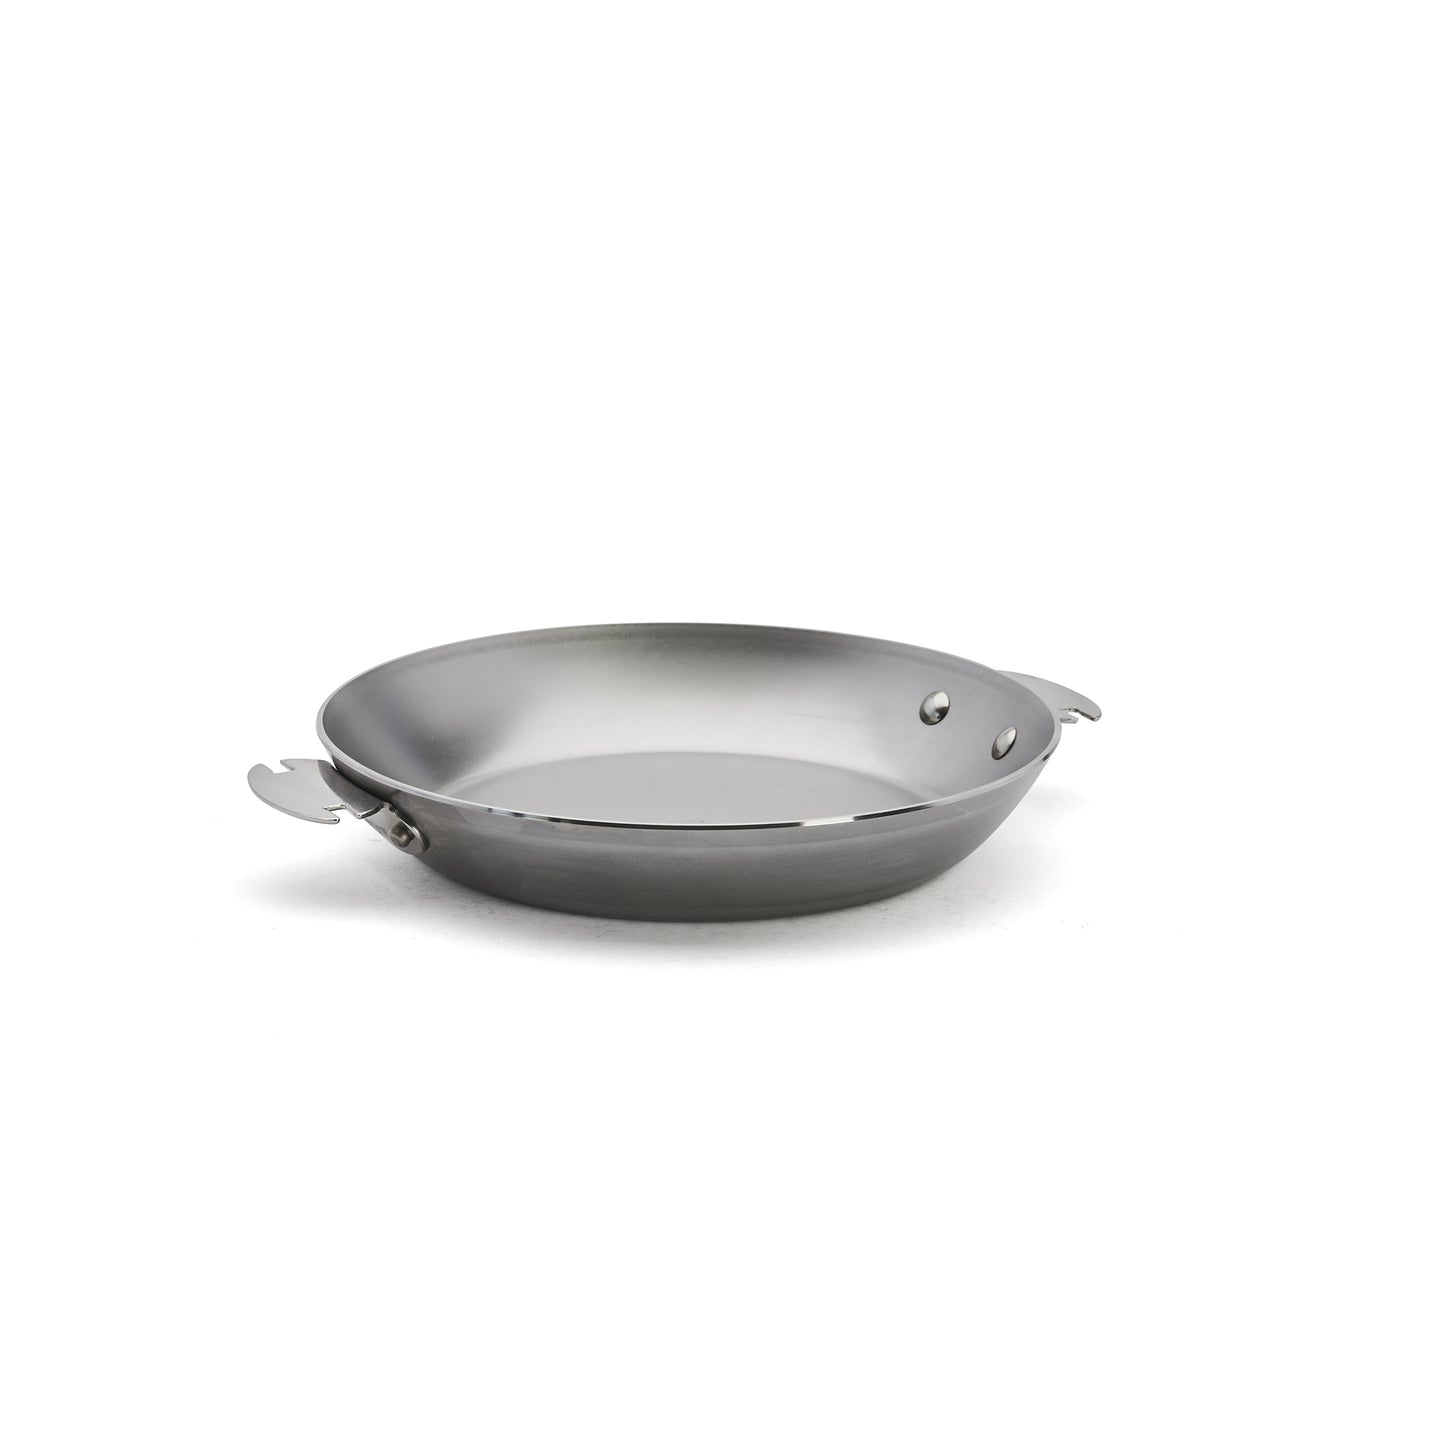 Mineral B Carbon Steel Fry Pan - LOQY system